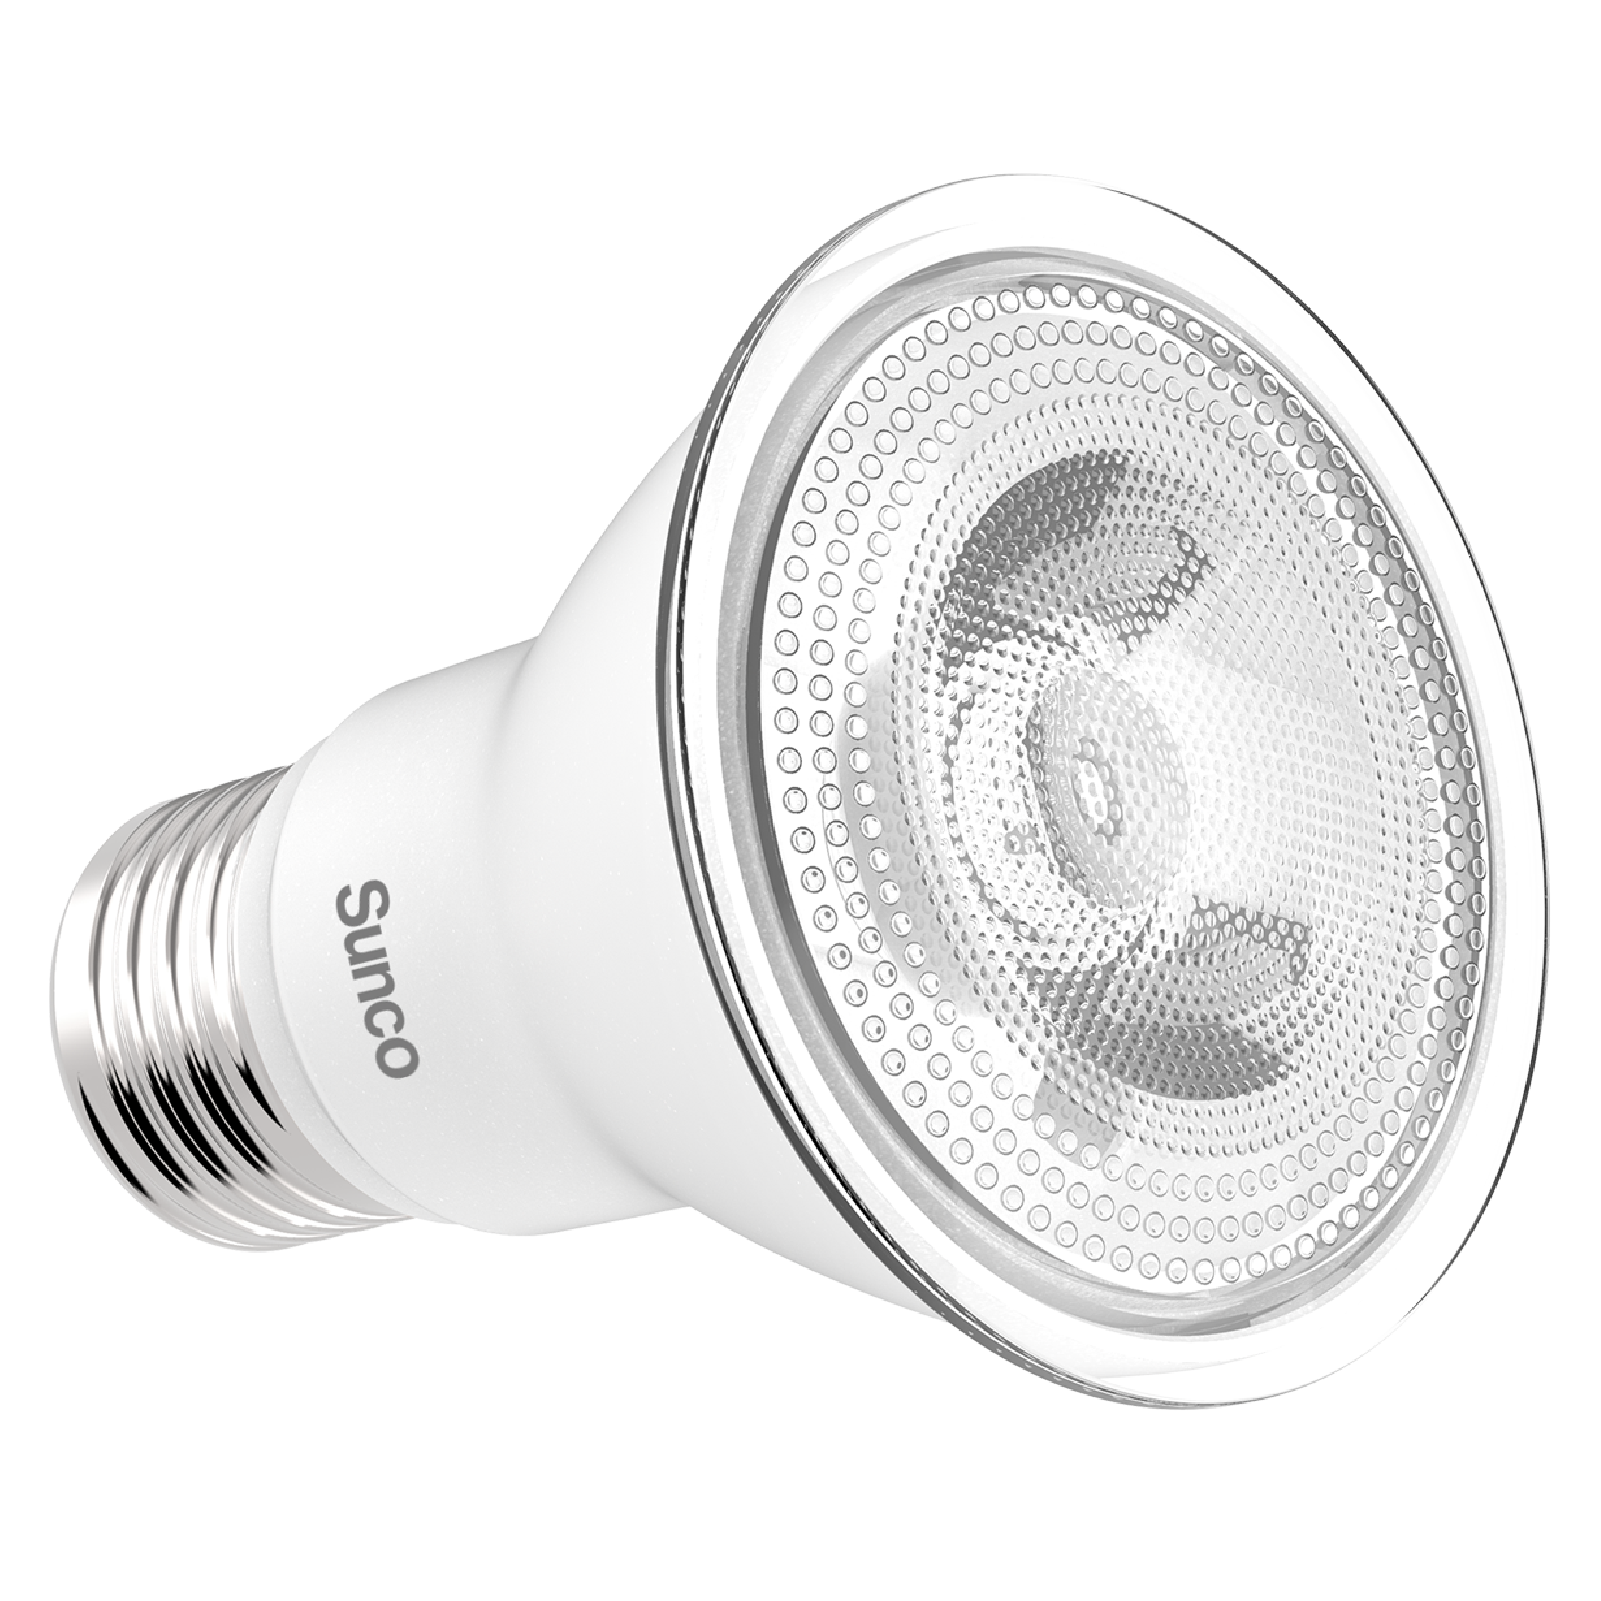 This PAR20 LED Bulb offers a bright light in a spot beam spread of 40-degrees. Its E26 base makes it a perfect LED replacement bulb, especially since it is IP65 wet rated for outdoor use. Use it for landscaping outside or as a spotlight inside for artwork, sculptures, and architectural details. Its compact form makes it fit in 4-inch recessed cans for reliable downlight in your office, living room, kitchen, or bath.